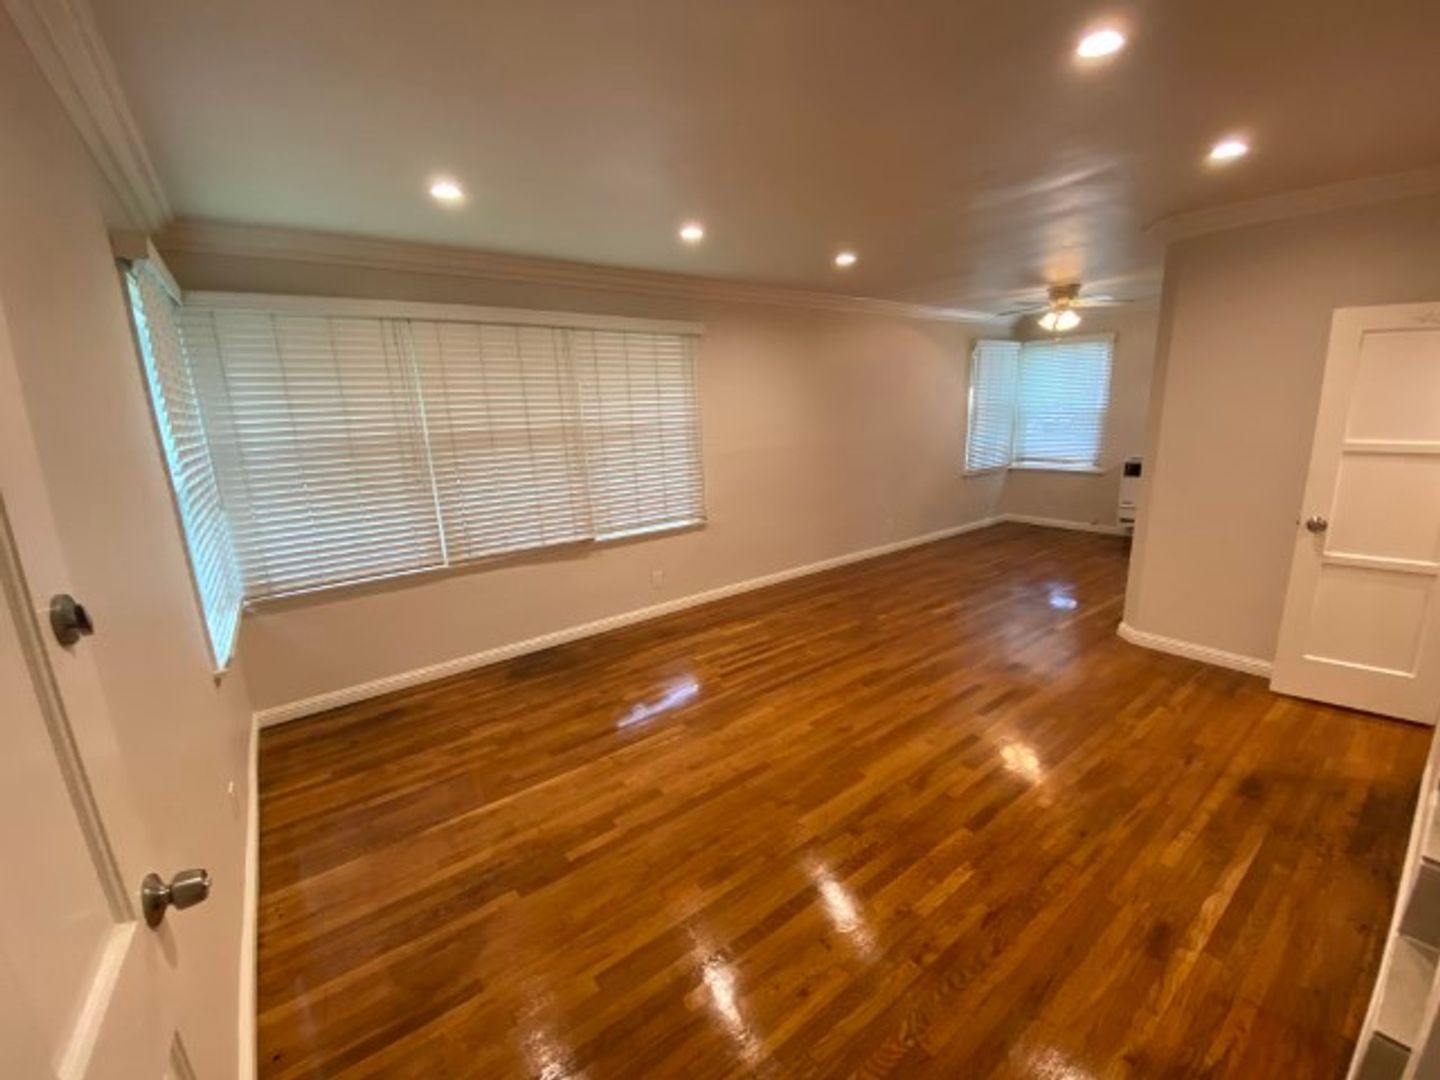 Property Listing for 07/22/2020